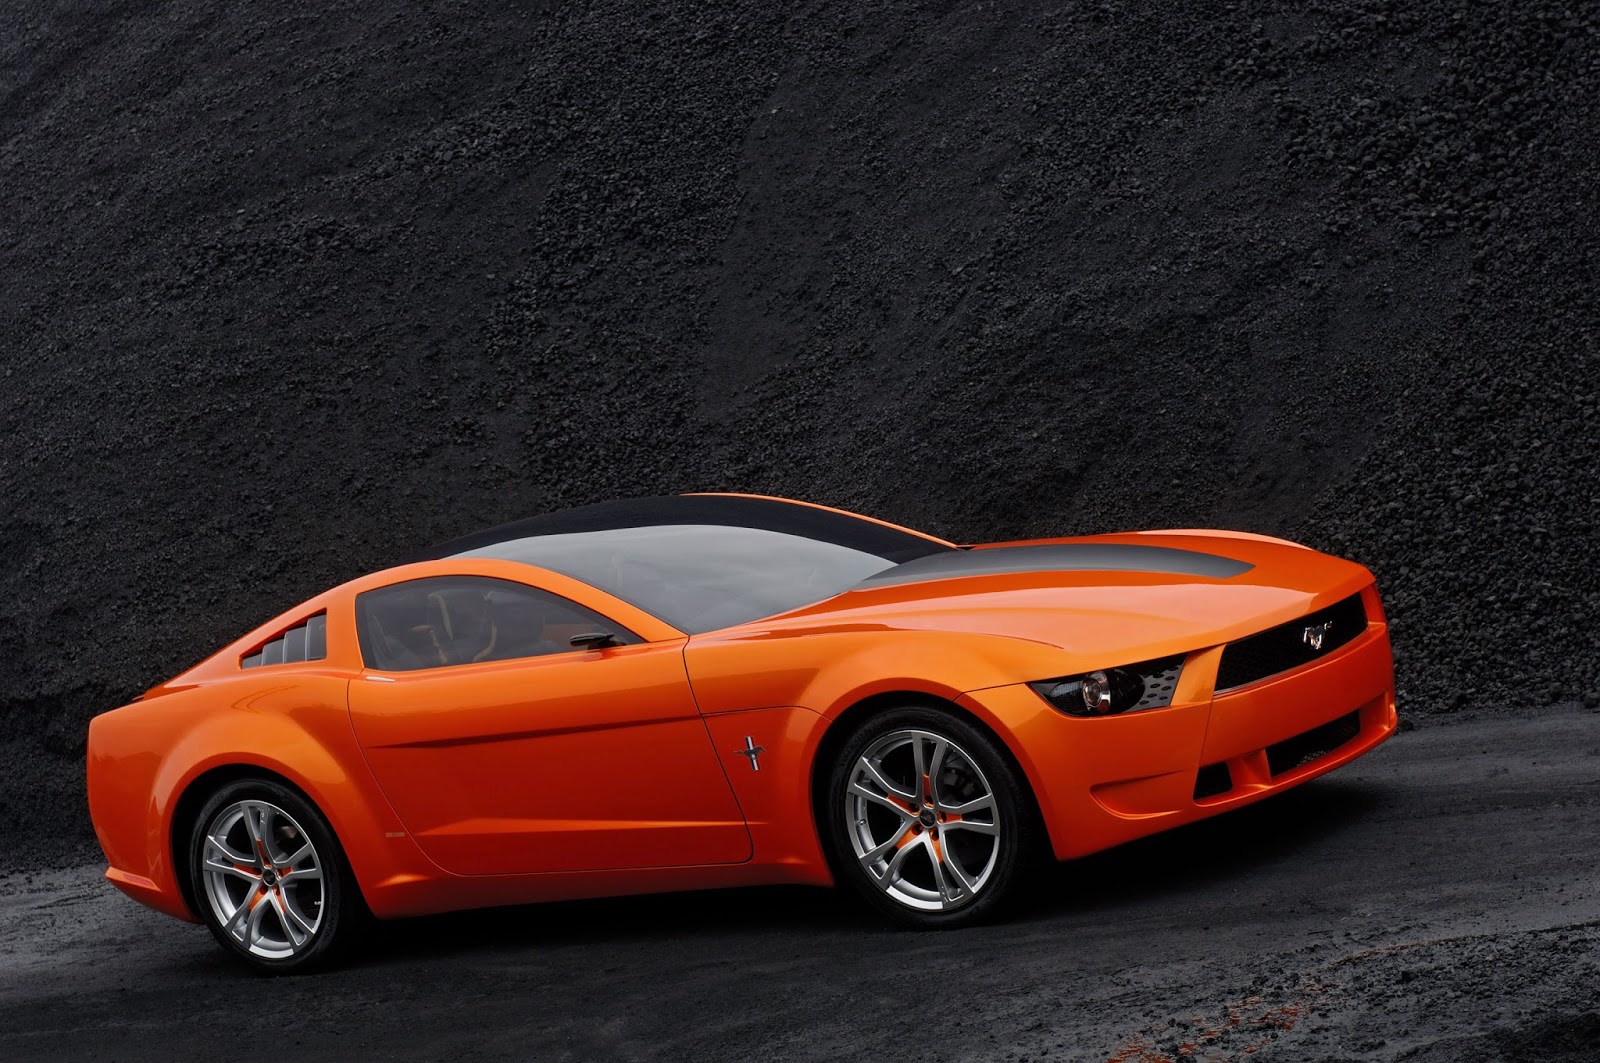 Mustang 2016 Concept